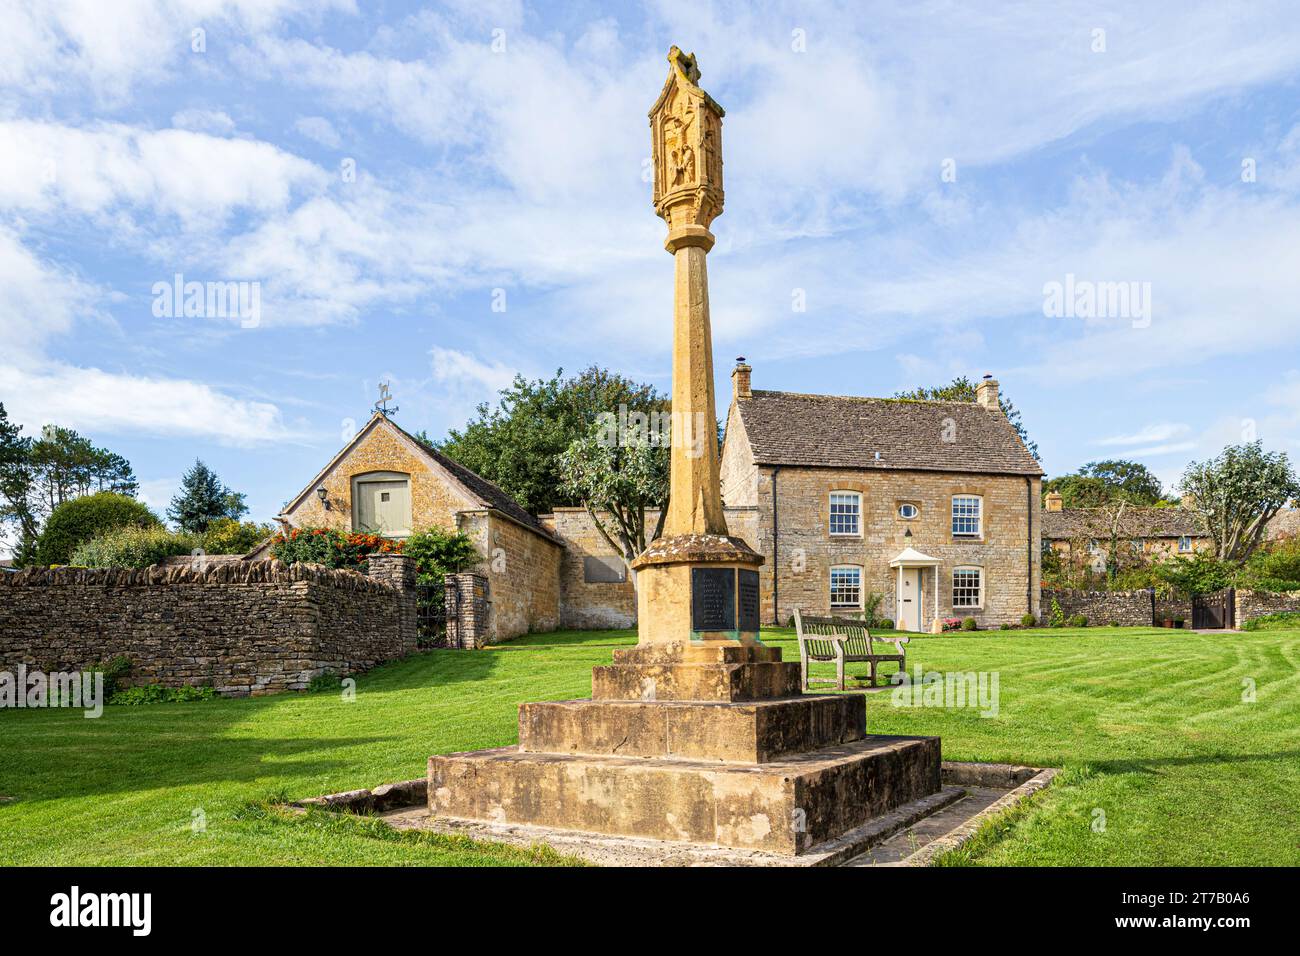 The war memorial and Civic Trust House on the green in the Cotswold village of Guiting Power, Gloucestershire, England UK Stock Photo